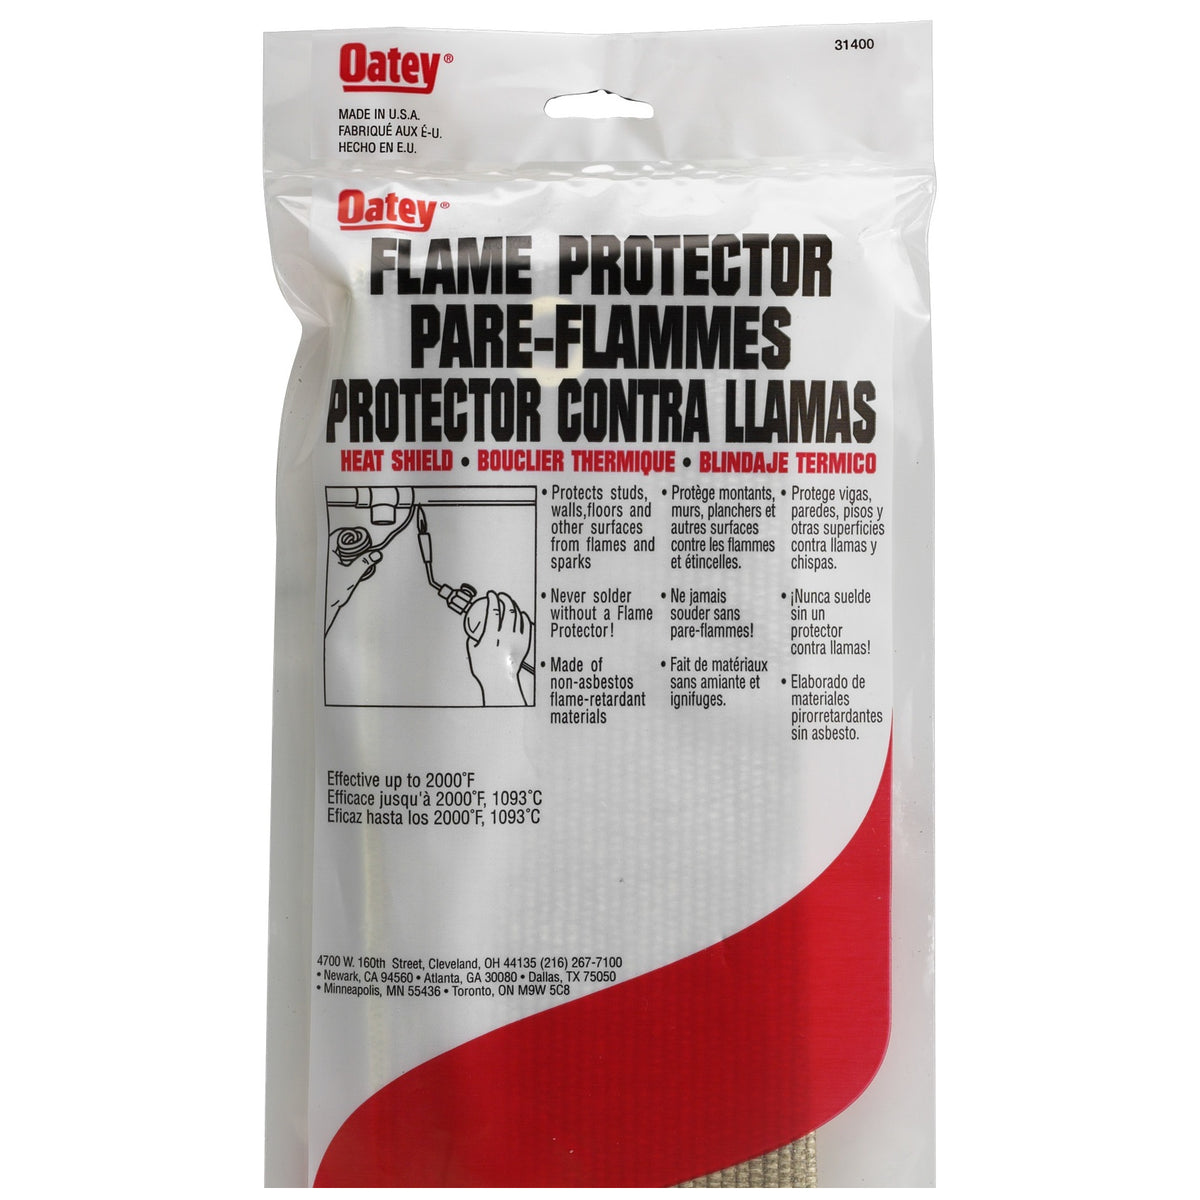 Oatey 31400 Flame Protector, 9" x 12"